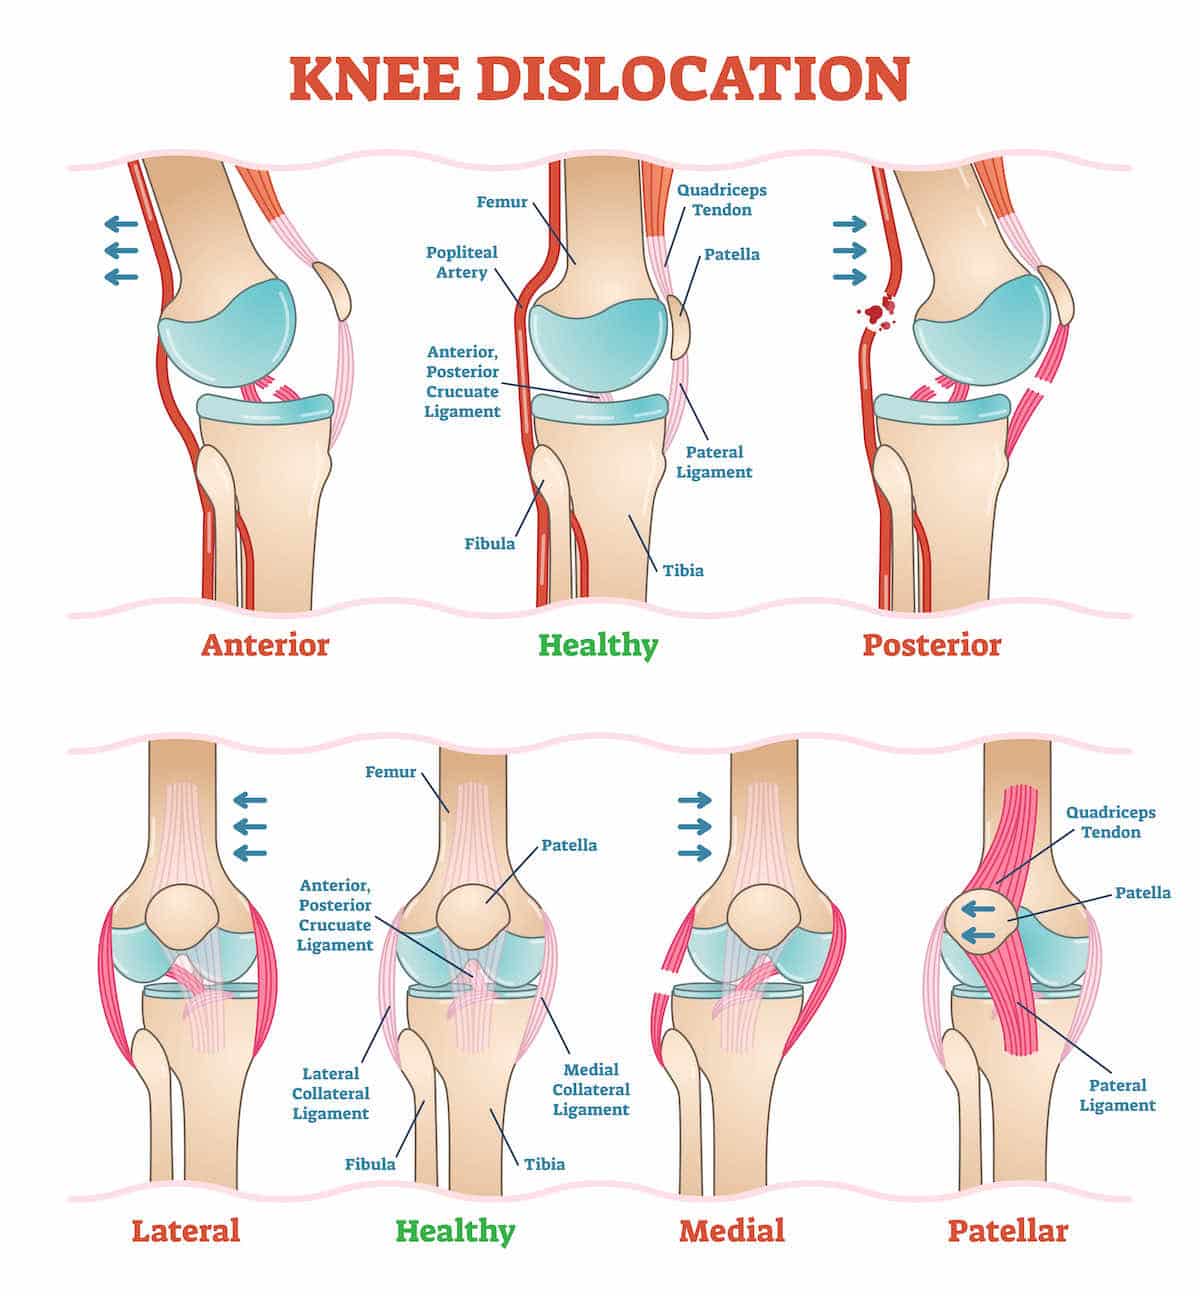 Prevention of Knee Dislocation